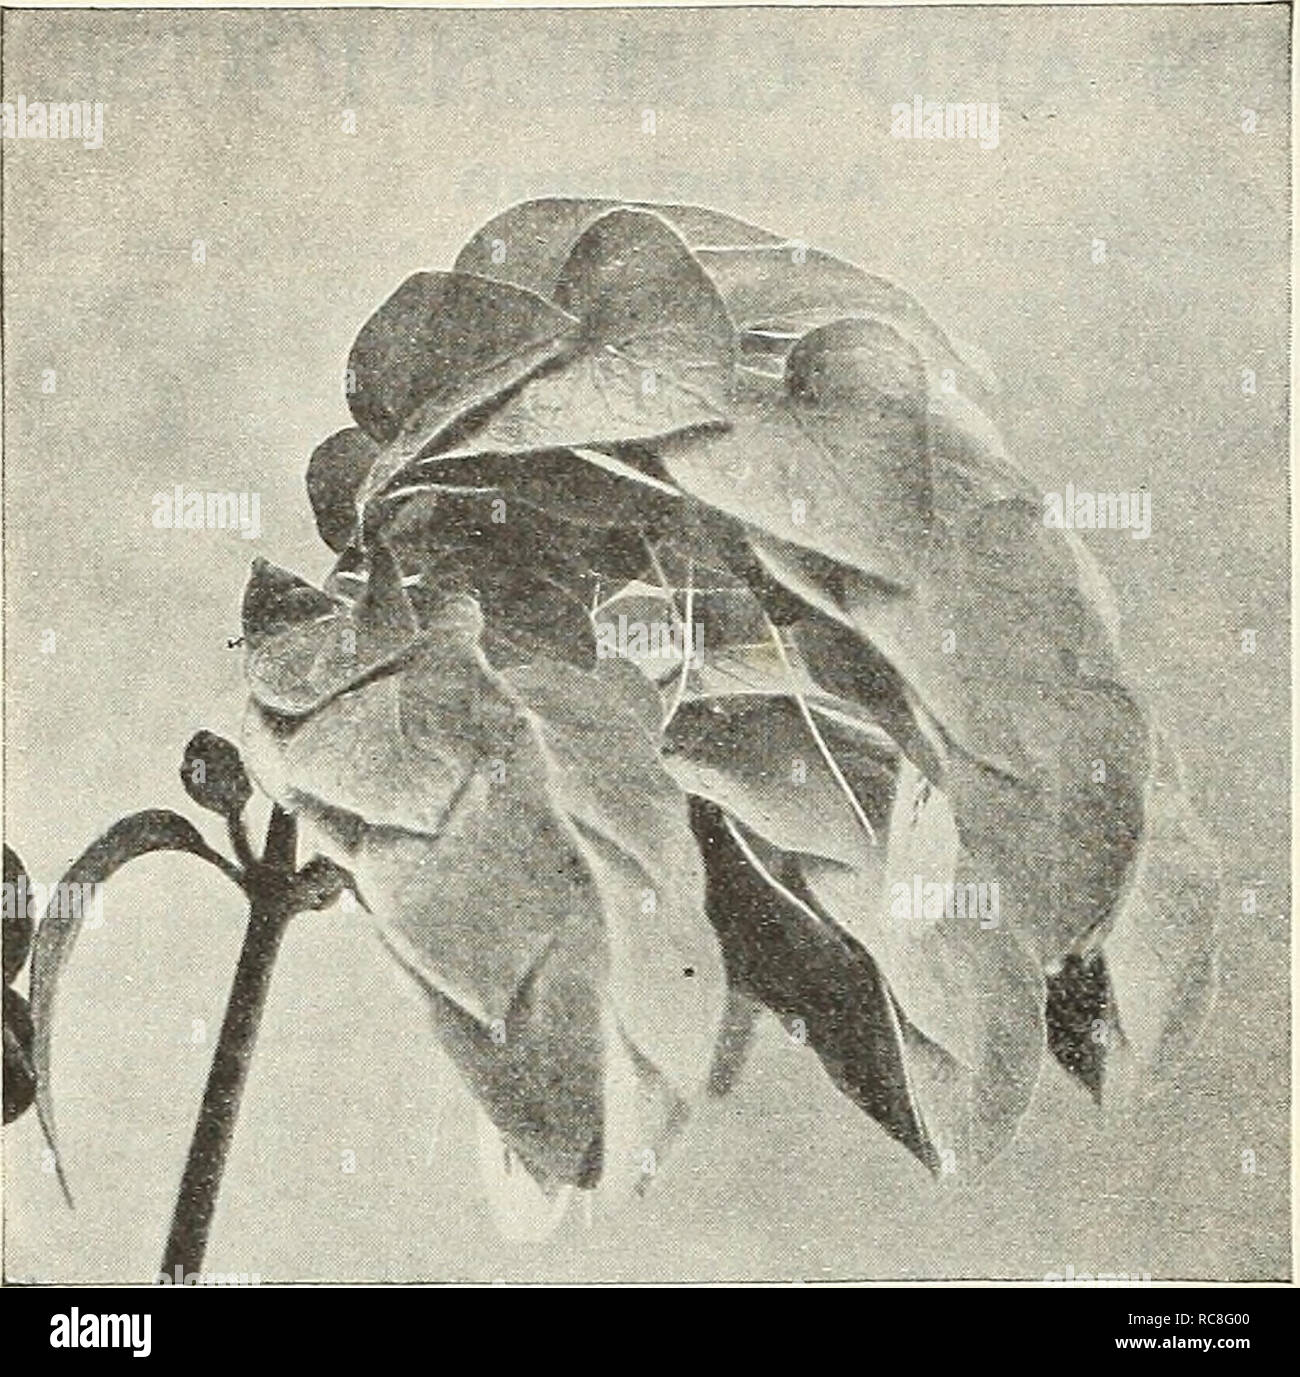 . Dreer's garden book 1930. Seeds Catalogs; Nursery stock Catalogs; Gardening Equipment and supplies Catalogs; Flowers Seeds Catalogs; Vegetables Seeds Catalogs; Fruit Seeds Catalogs. 130 fejj—,— ' GARDEN* QREENH0U8E PlANTiS PHJWJHM. Beloperone Guttata Asparagus Plumosus Nanus (Asparagus Fern). There is no better plant for table decoration than this. The foliage is more delicate than that of the finest Fern, being lace-like in its filminess. A plant with half a dozen stalks is a mass of dainty, misty green, among which the stems of a few flowers can be thrust in such a manner as to make a pre Stock Photo